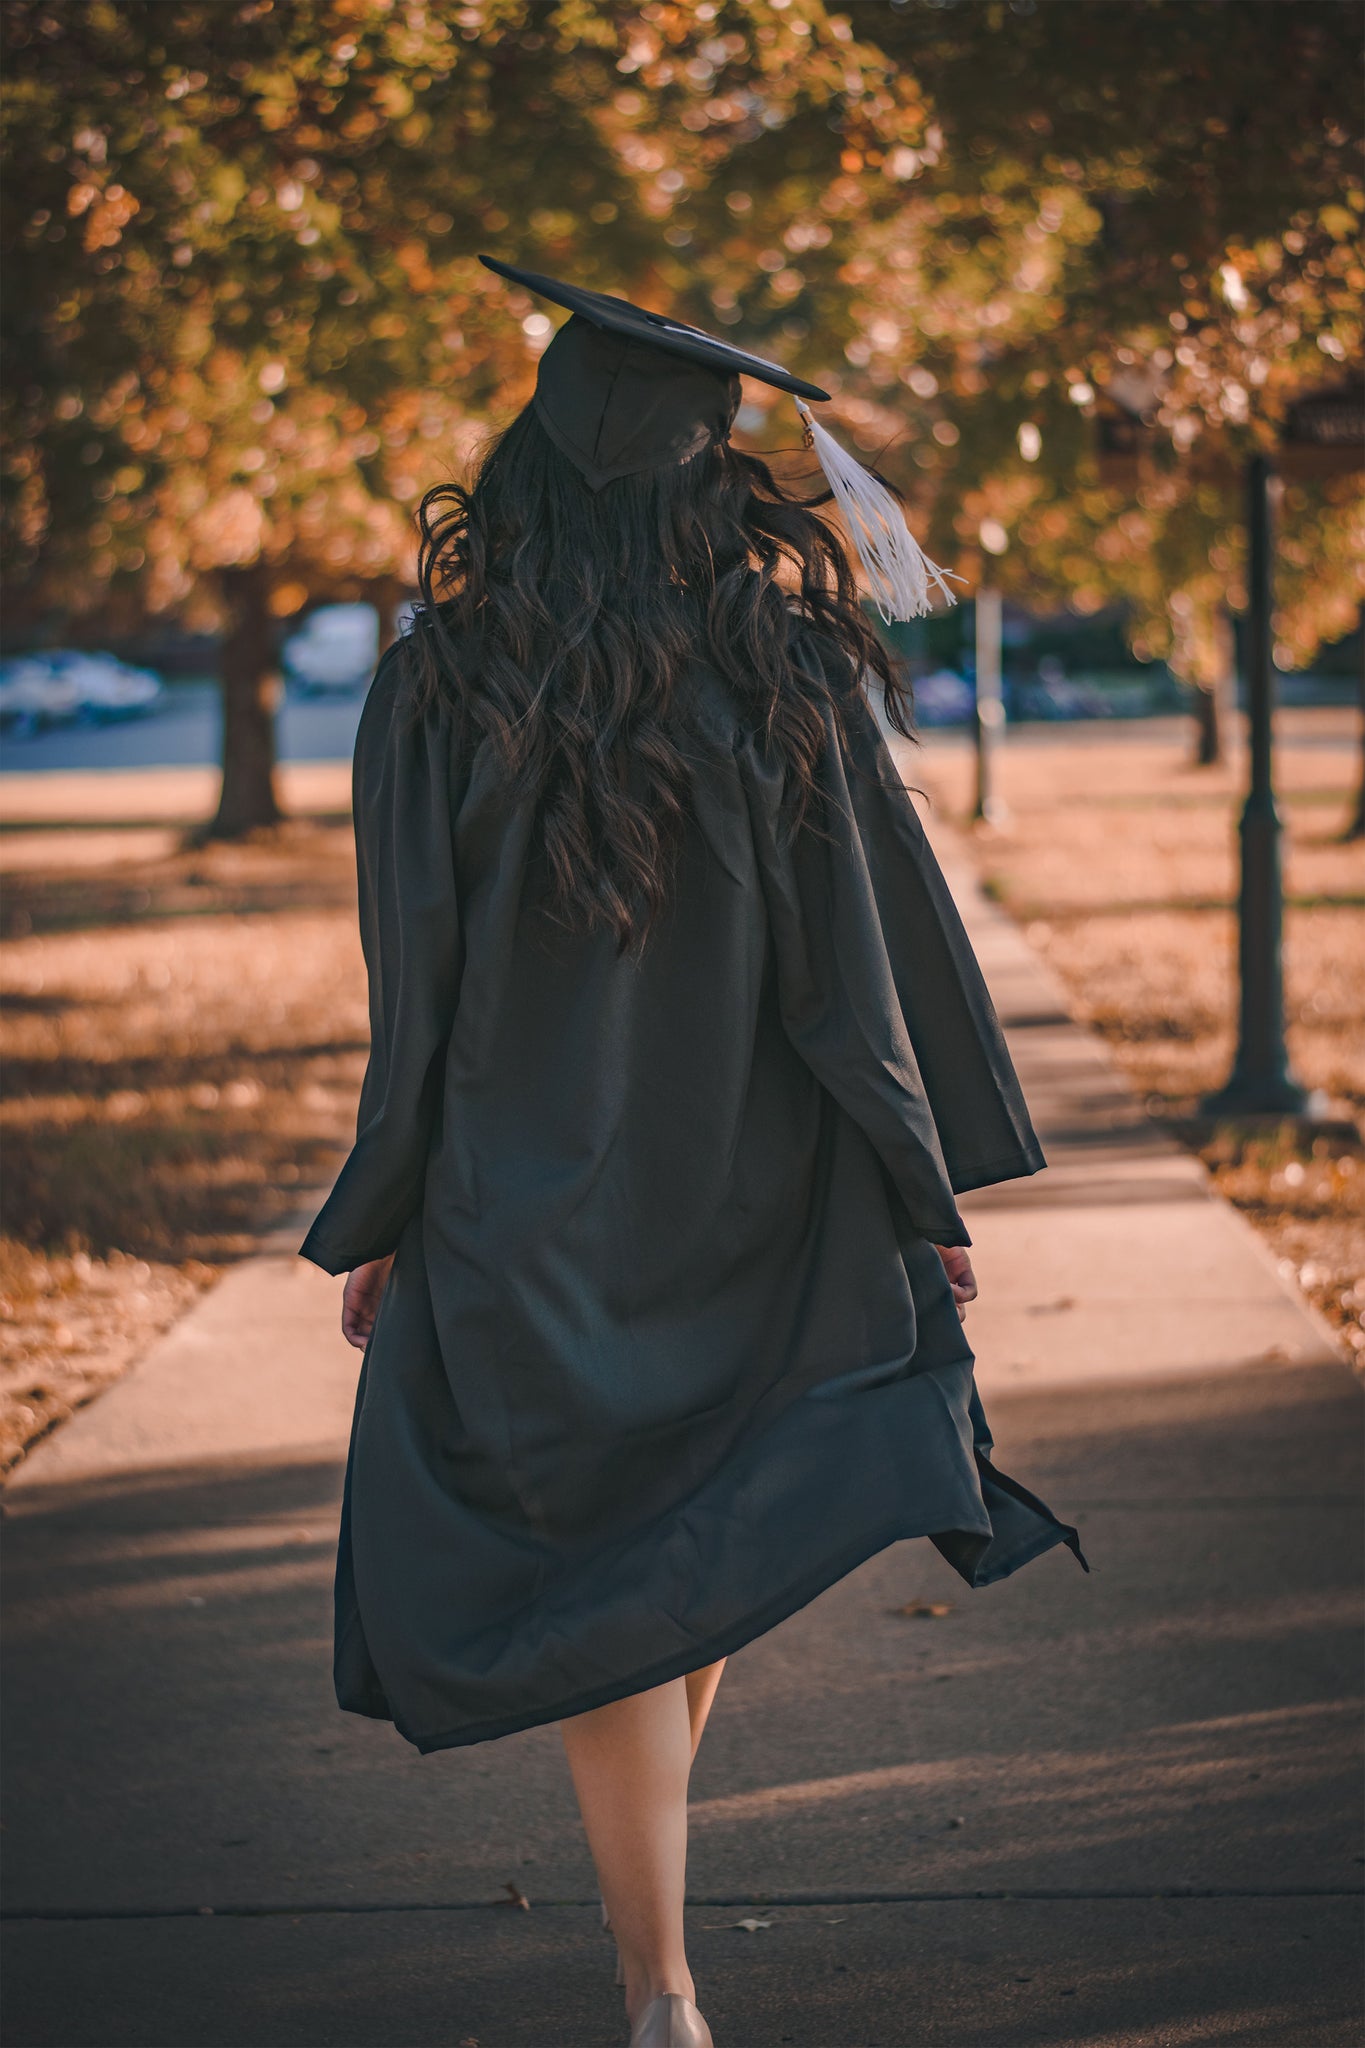 Most sustainable ways to celebrate graduation this year and why it matters